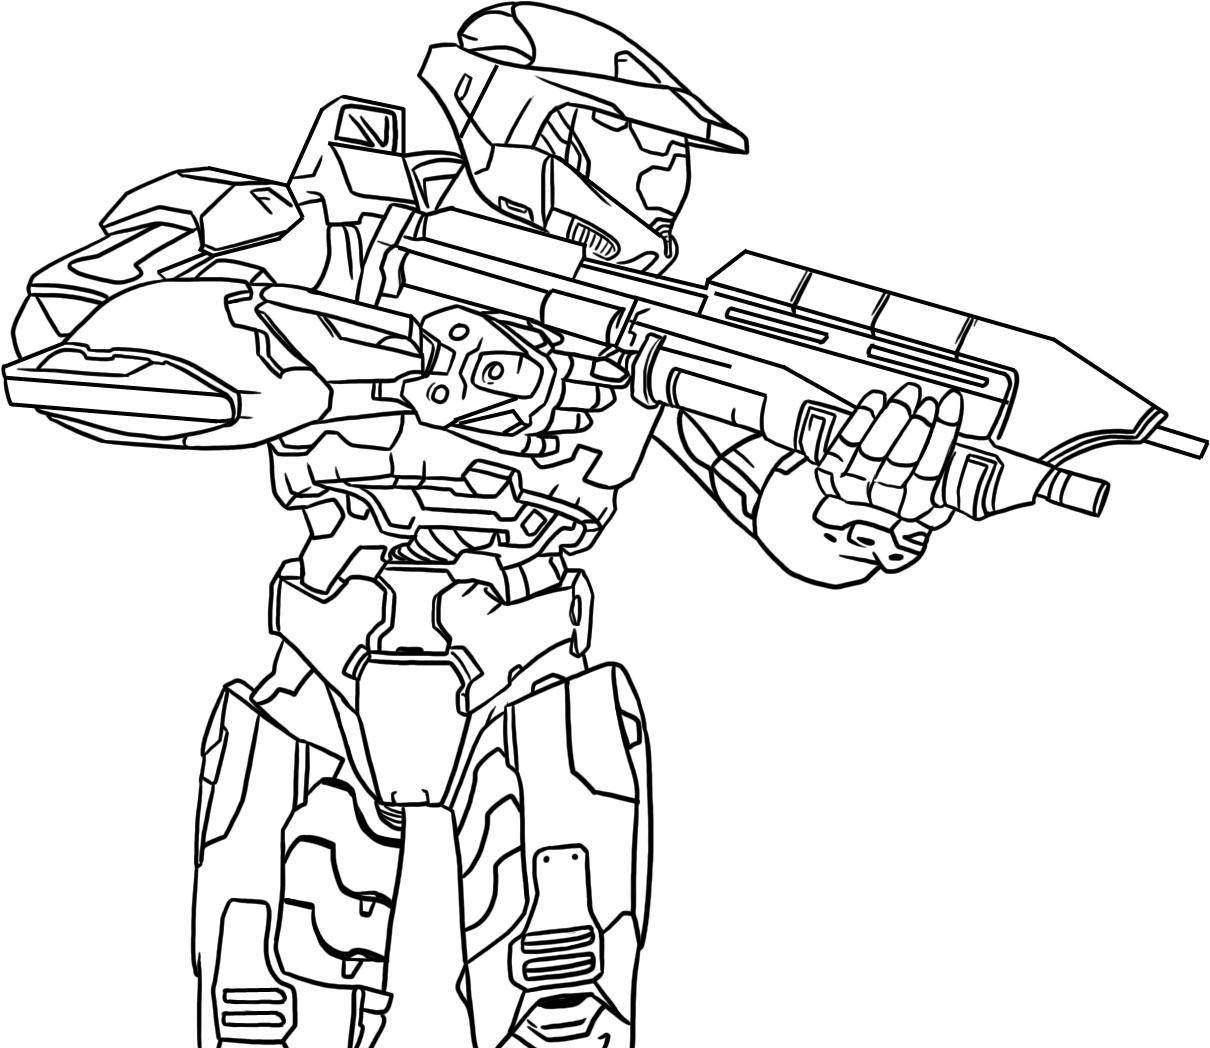 Halo Coloring Pages - ColoringPagesOnly.com